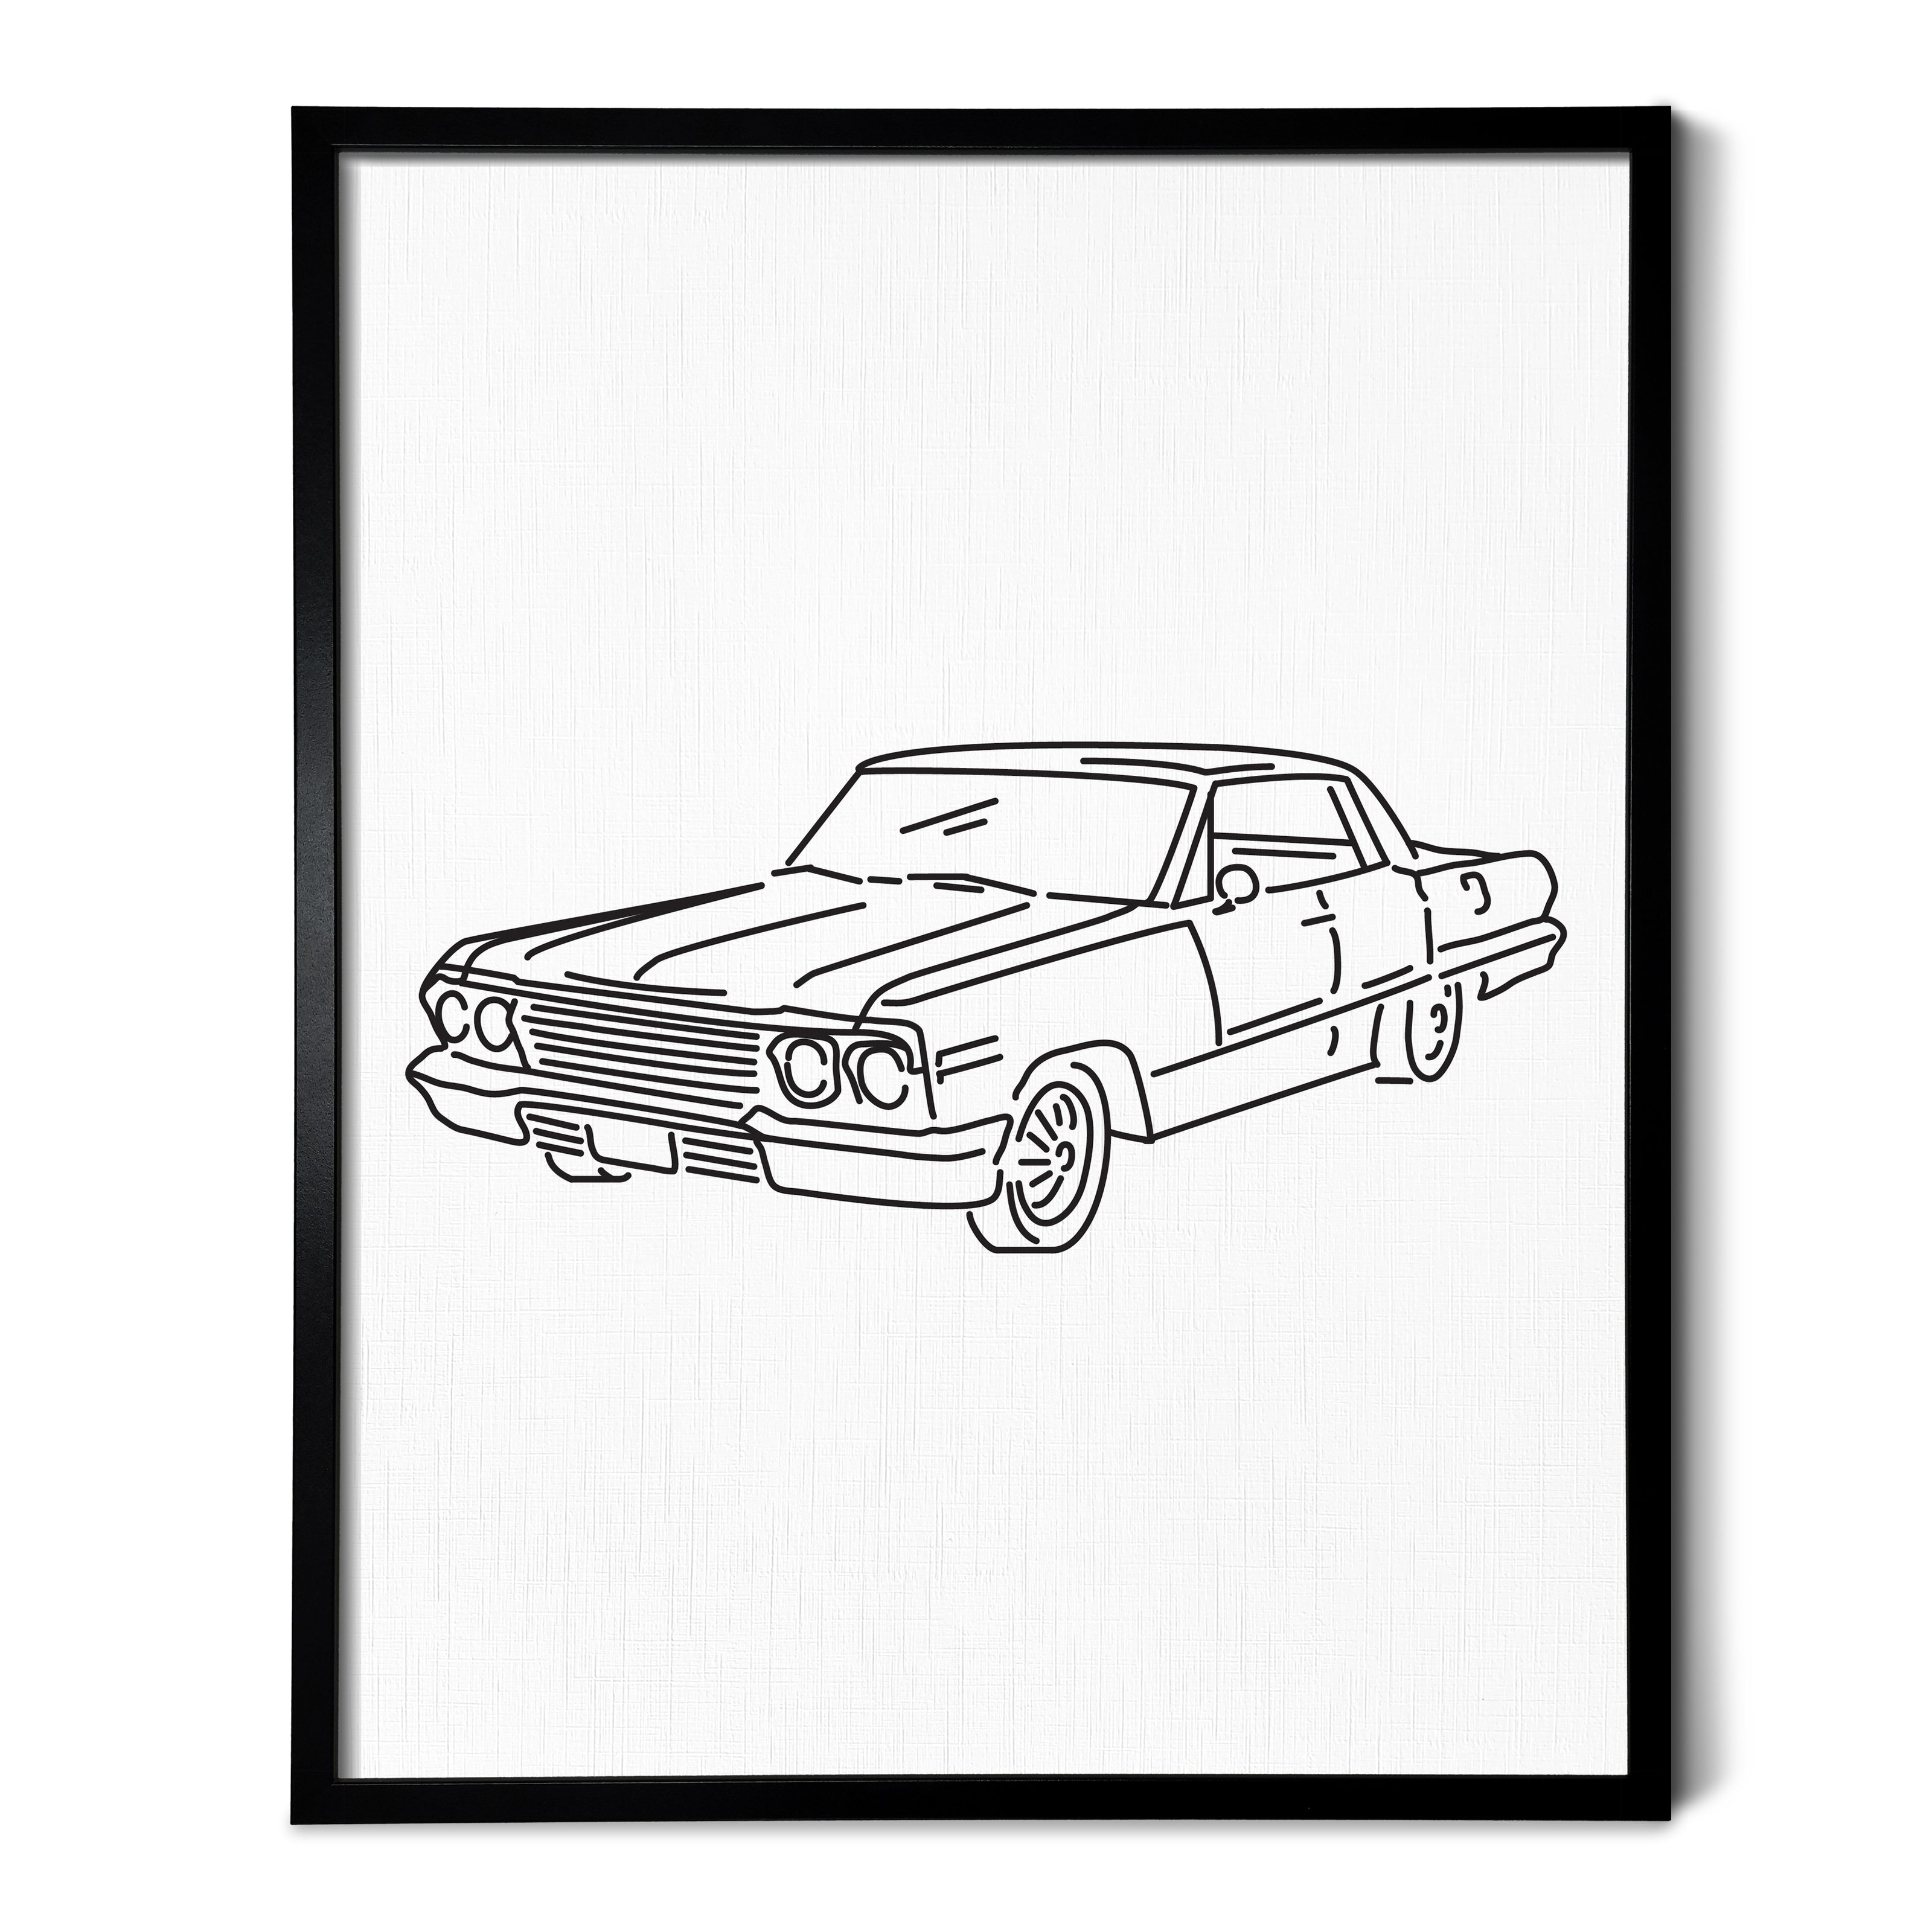 A line art drawing of a car on white linen paper in a thin black picture frame